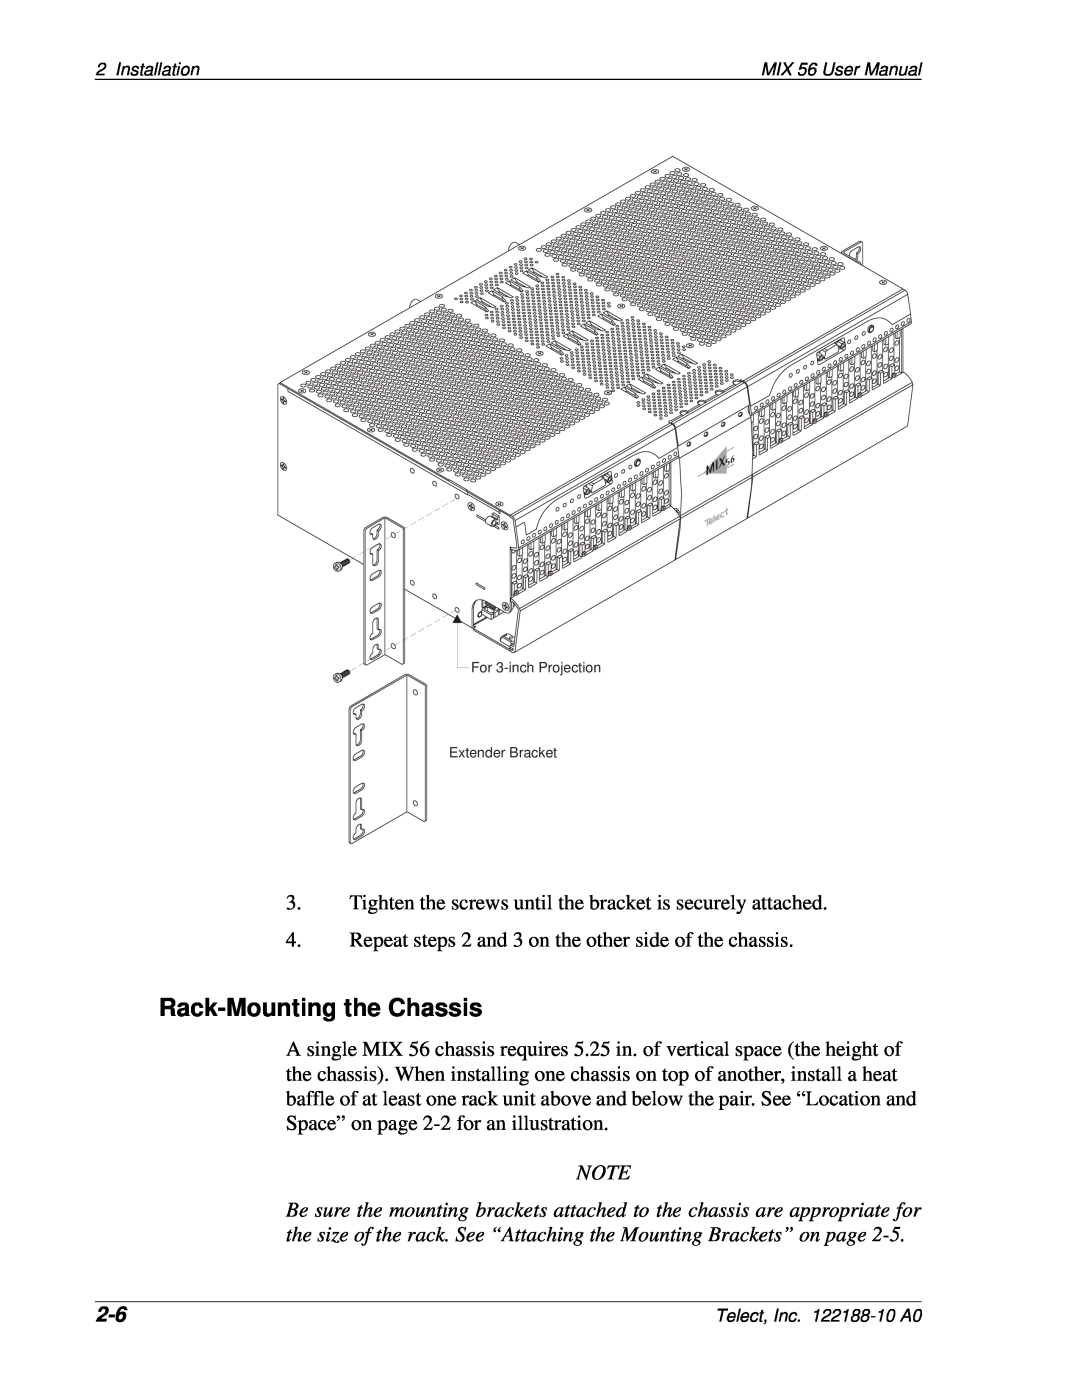 Telect MIX 56 user manual Rack-Mounting the Chassis 